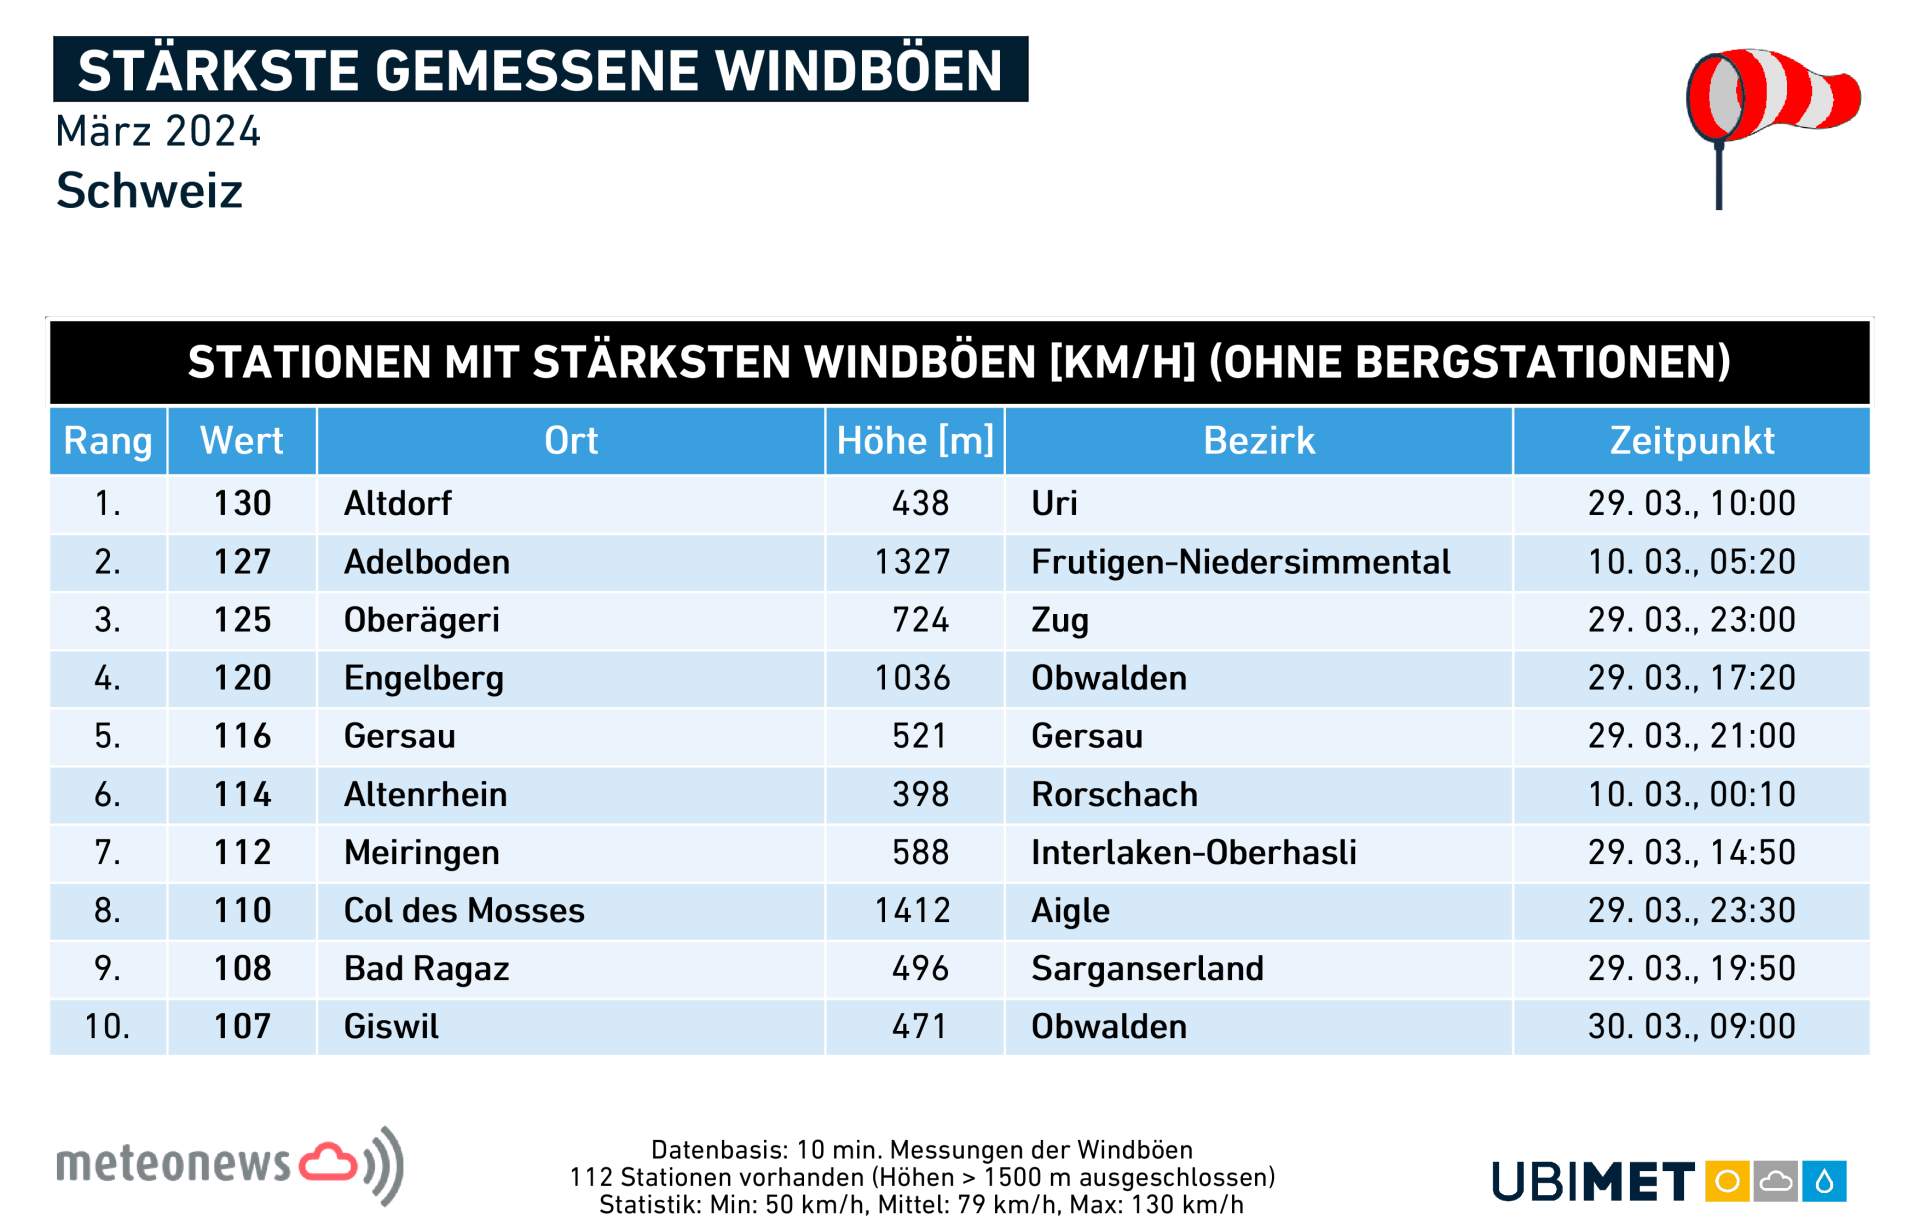 Fig. 4: Strongest gusts at altitudes below 1500 m last March (mainly foehn gusts); Source: MeteoNews, UBIMET